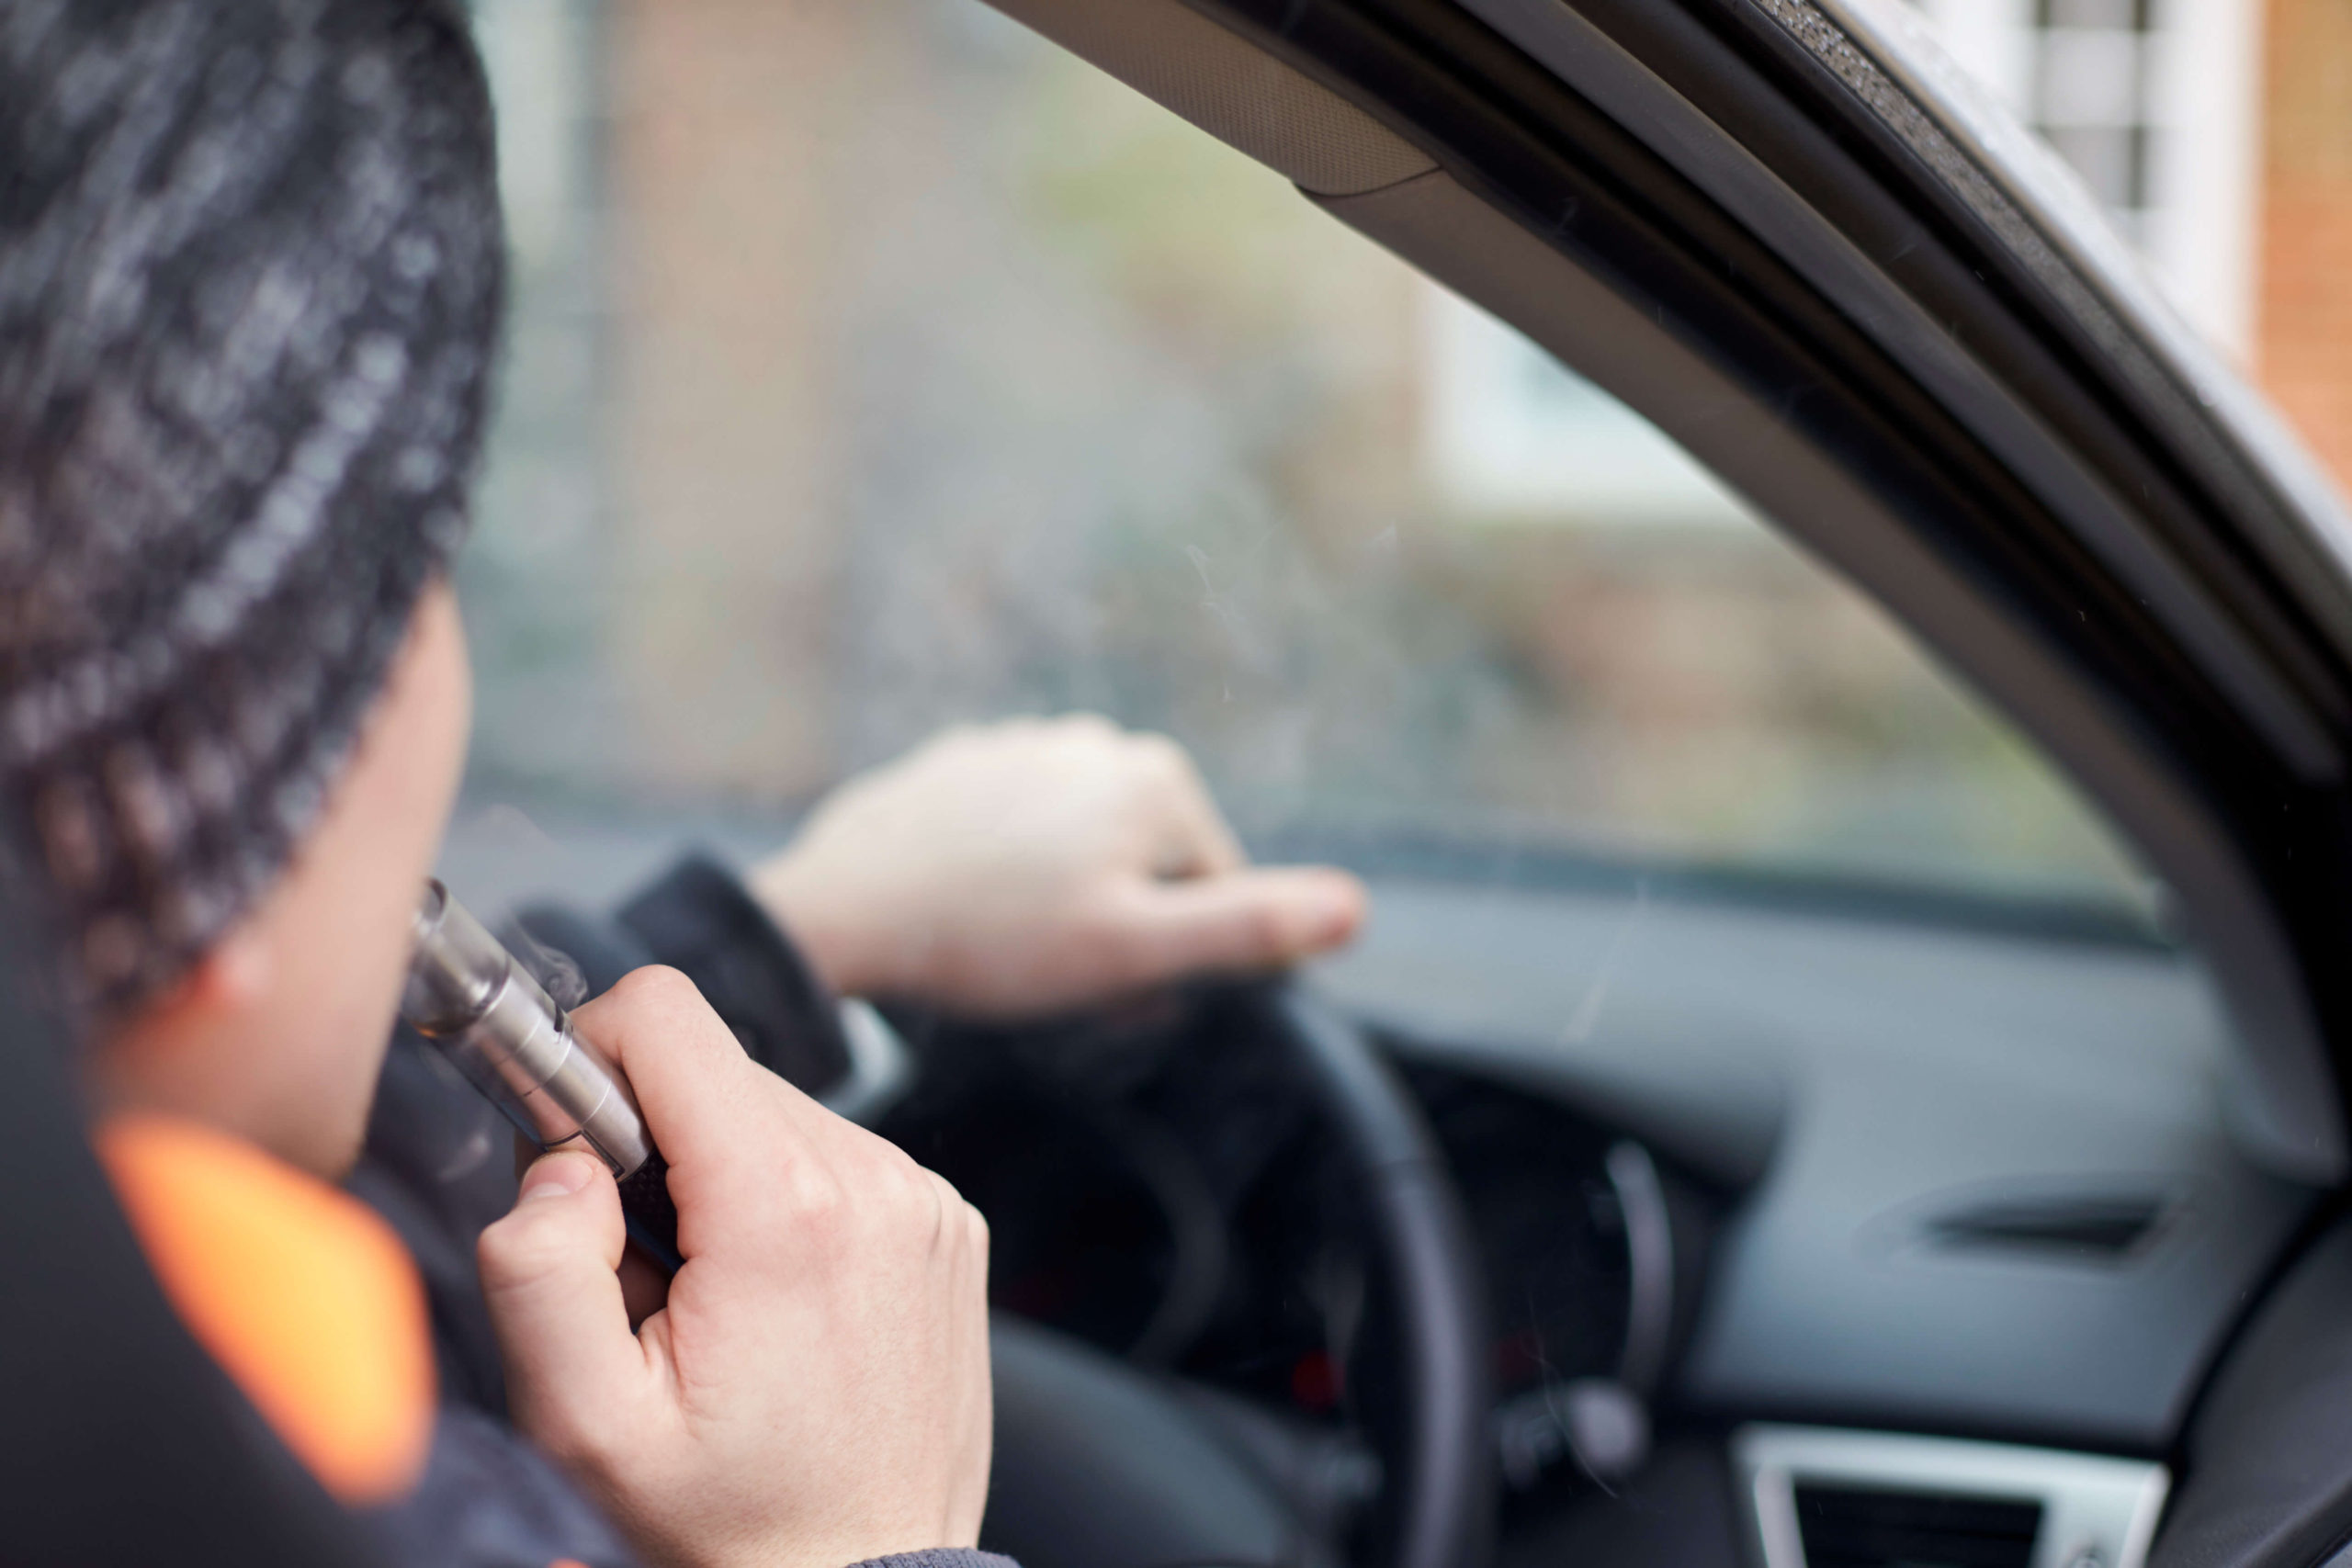 How to Keep Your Car Smelling Clean if You Smoke or Vape